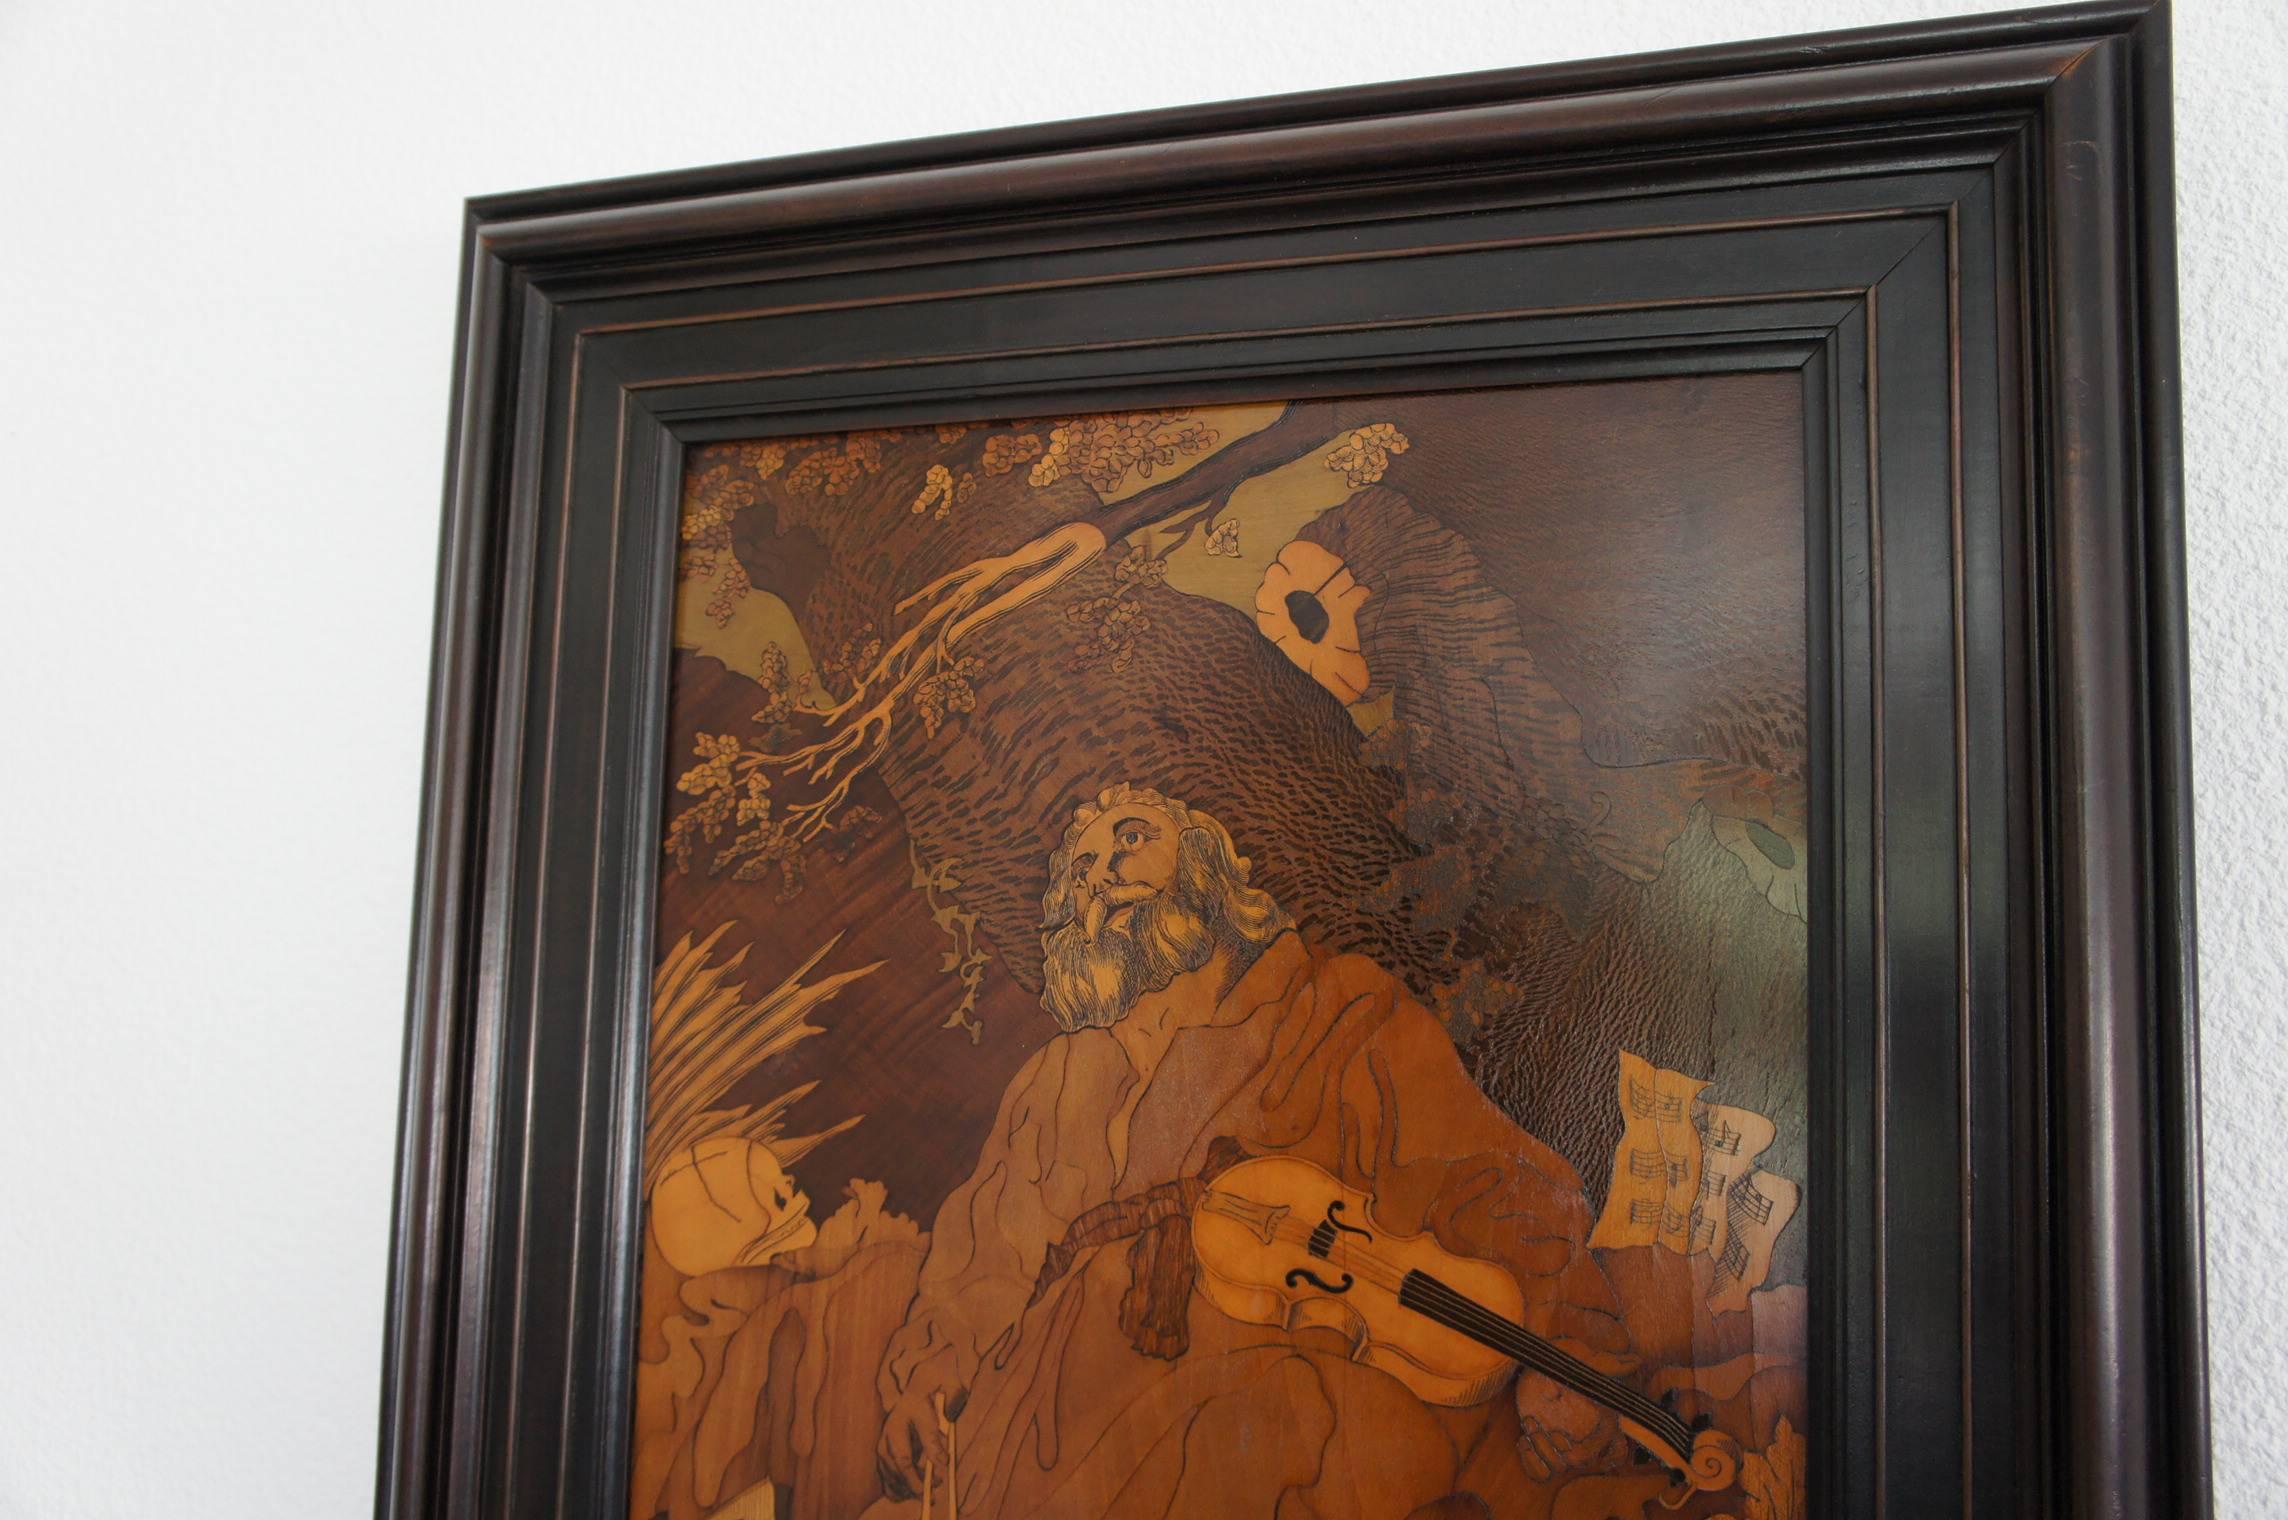 Amazing quality marquetry painting in mint condition.

Nowadays, where on earth would you have to go to find someone skilled enough to make such a wonderful work of art? This piece was made in a time when people were not yet pushed to make something